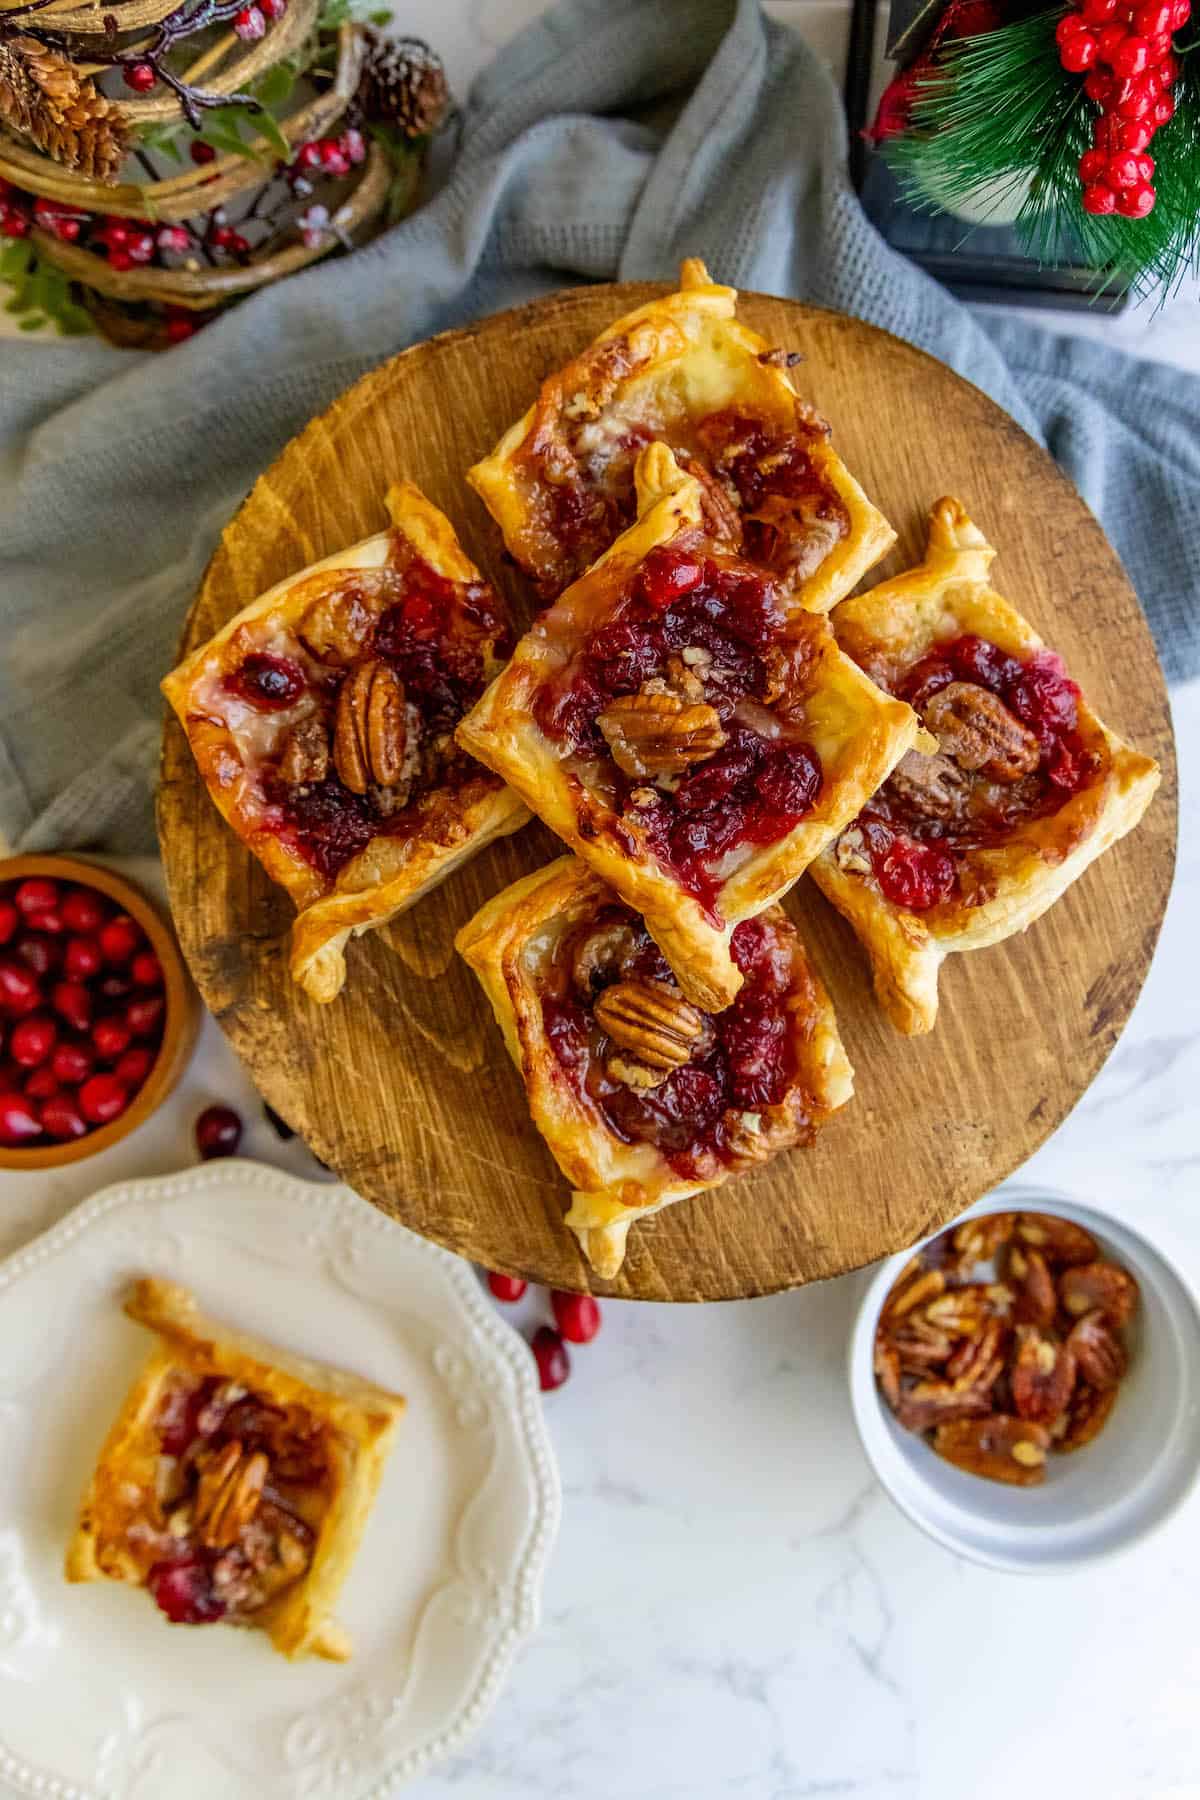 Cranberry pecan tarts and cranberries on a plate.